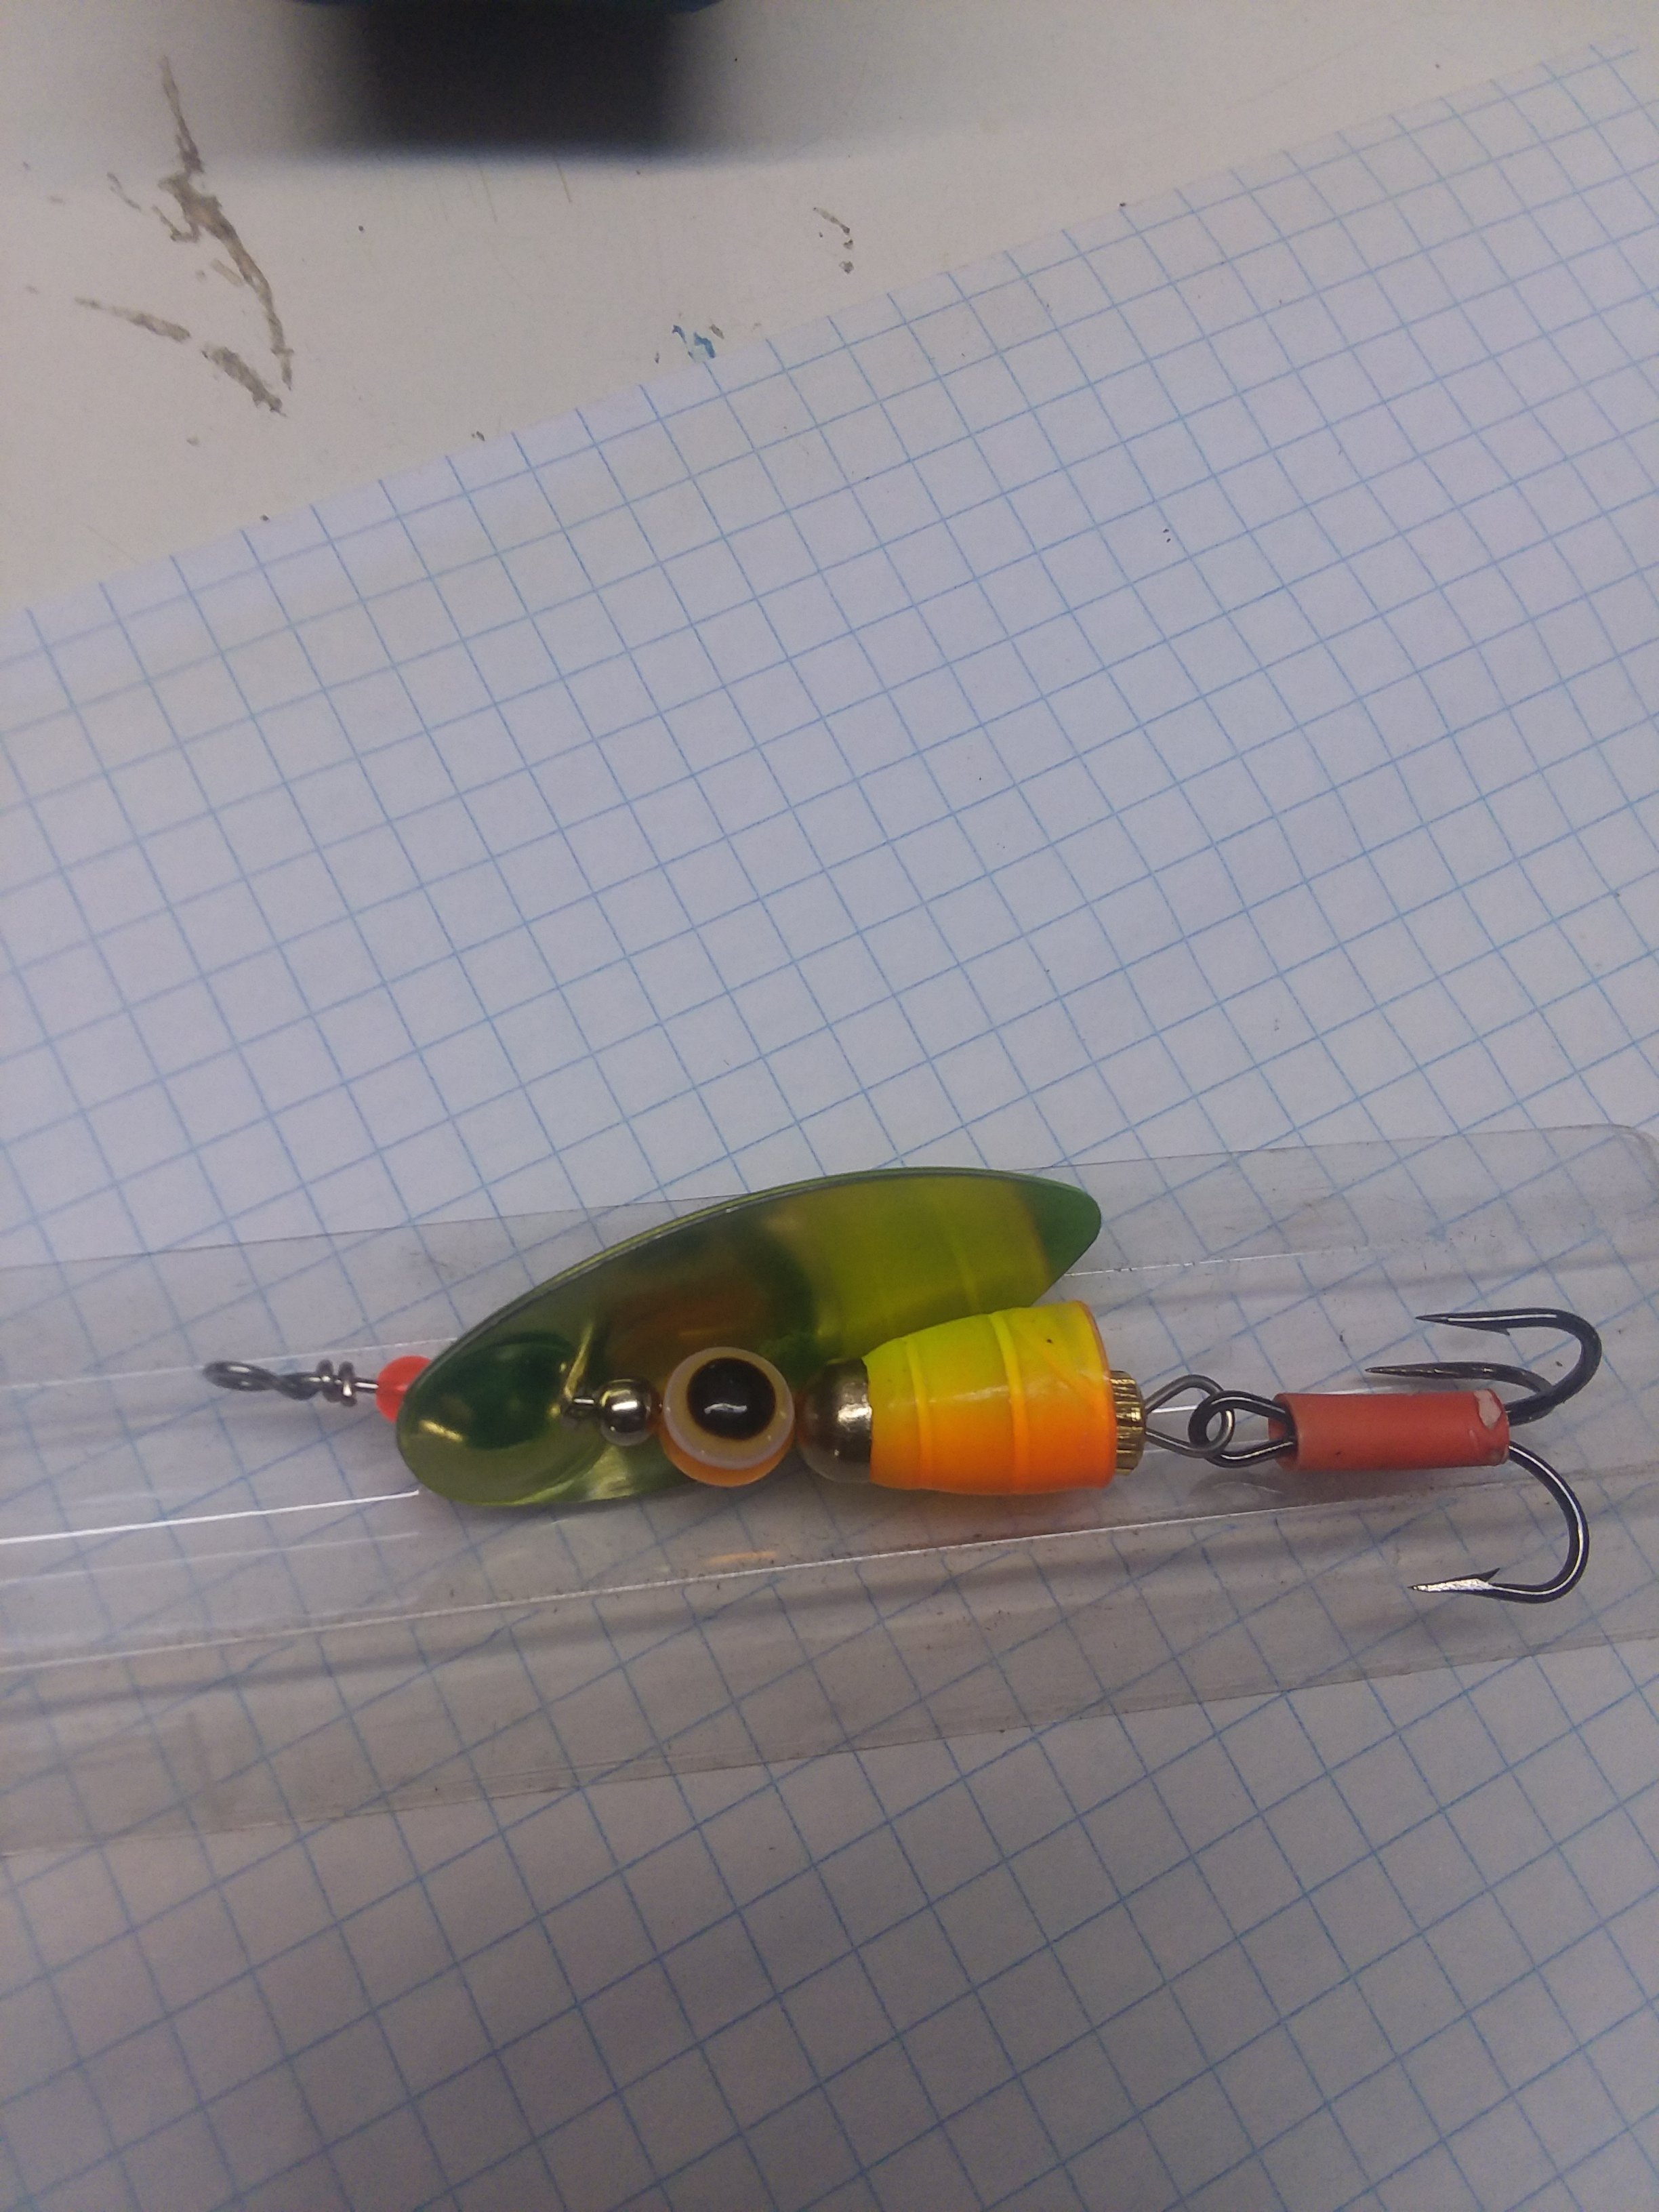 How do YOU tune your inline spinnerbait lures and make blades spin